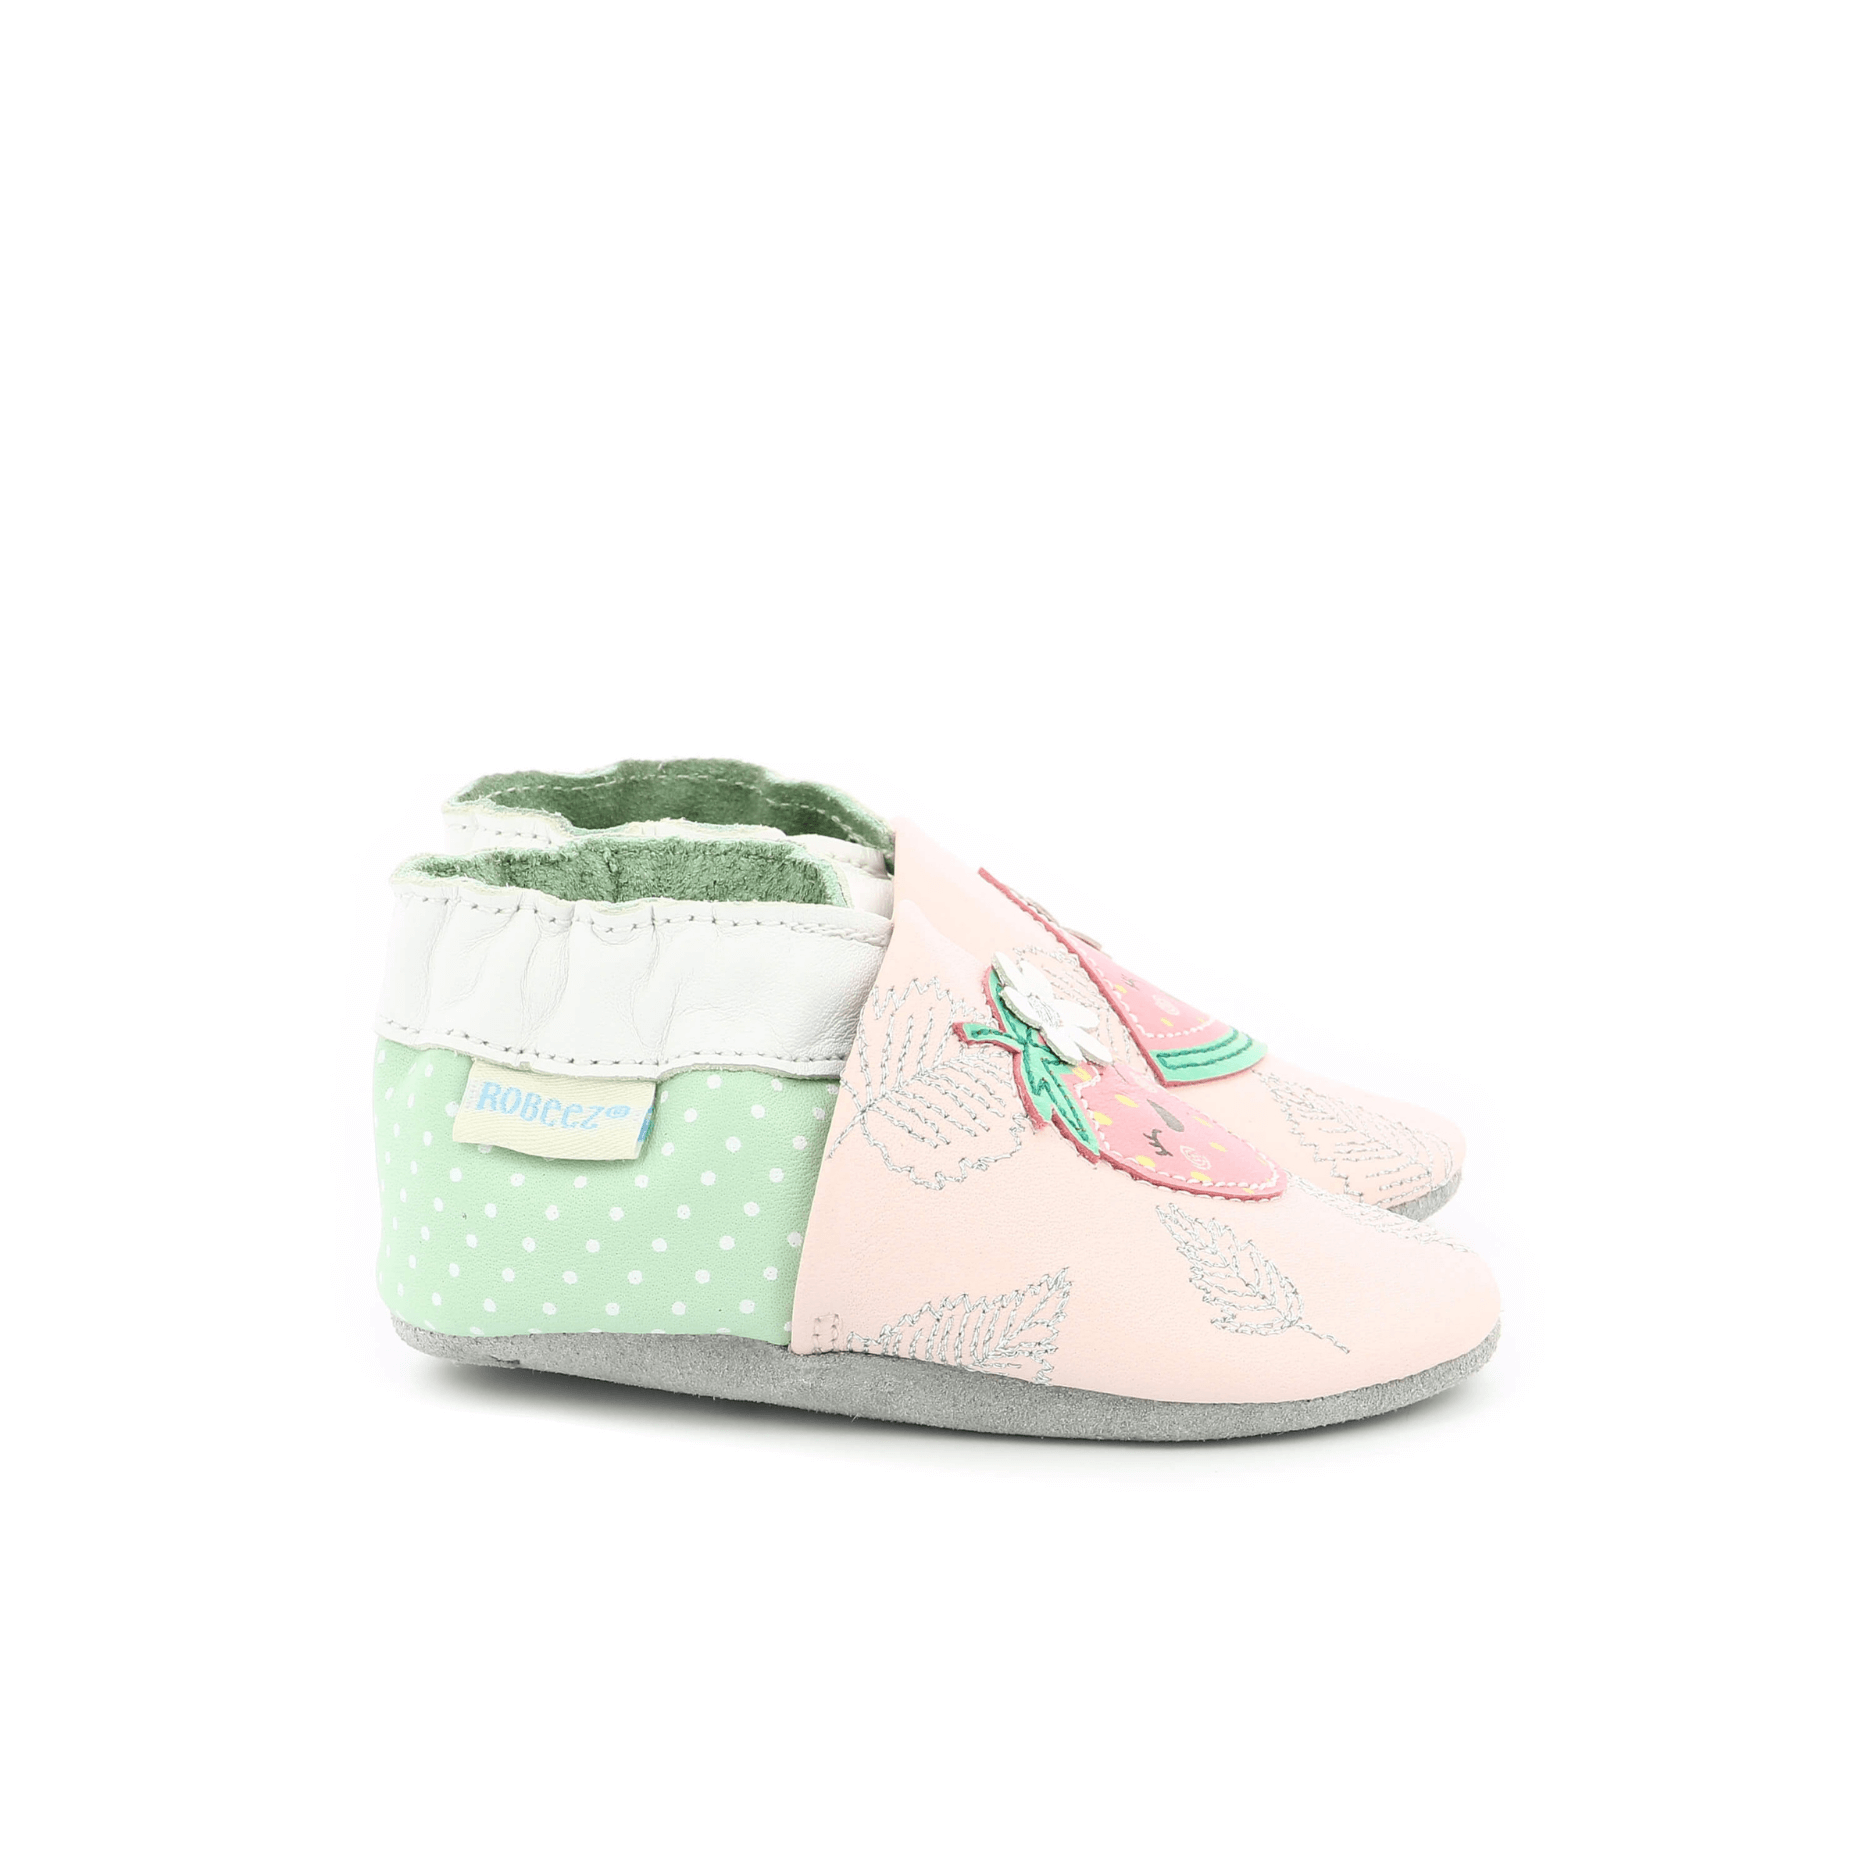 ROBEEZ Chaussons Fruit's Party Rose Clair Vert Clair ma petite pointure 